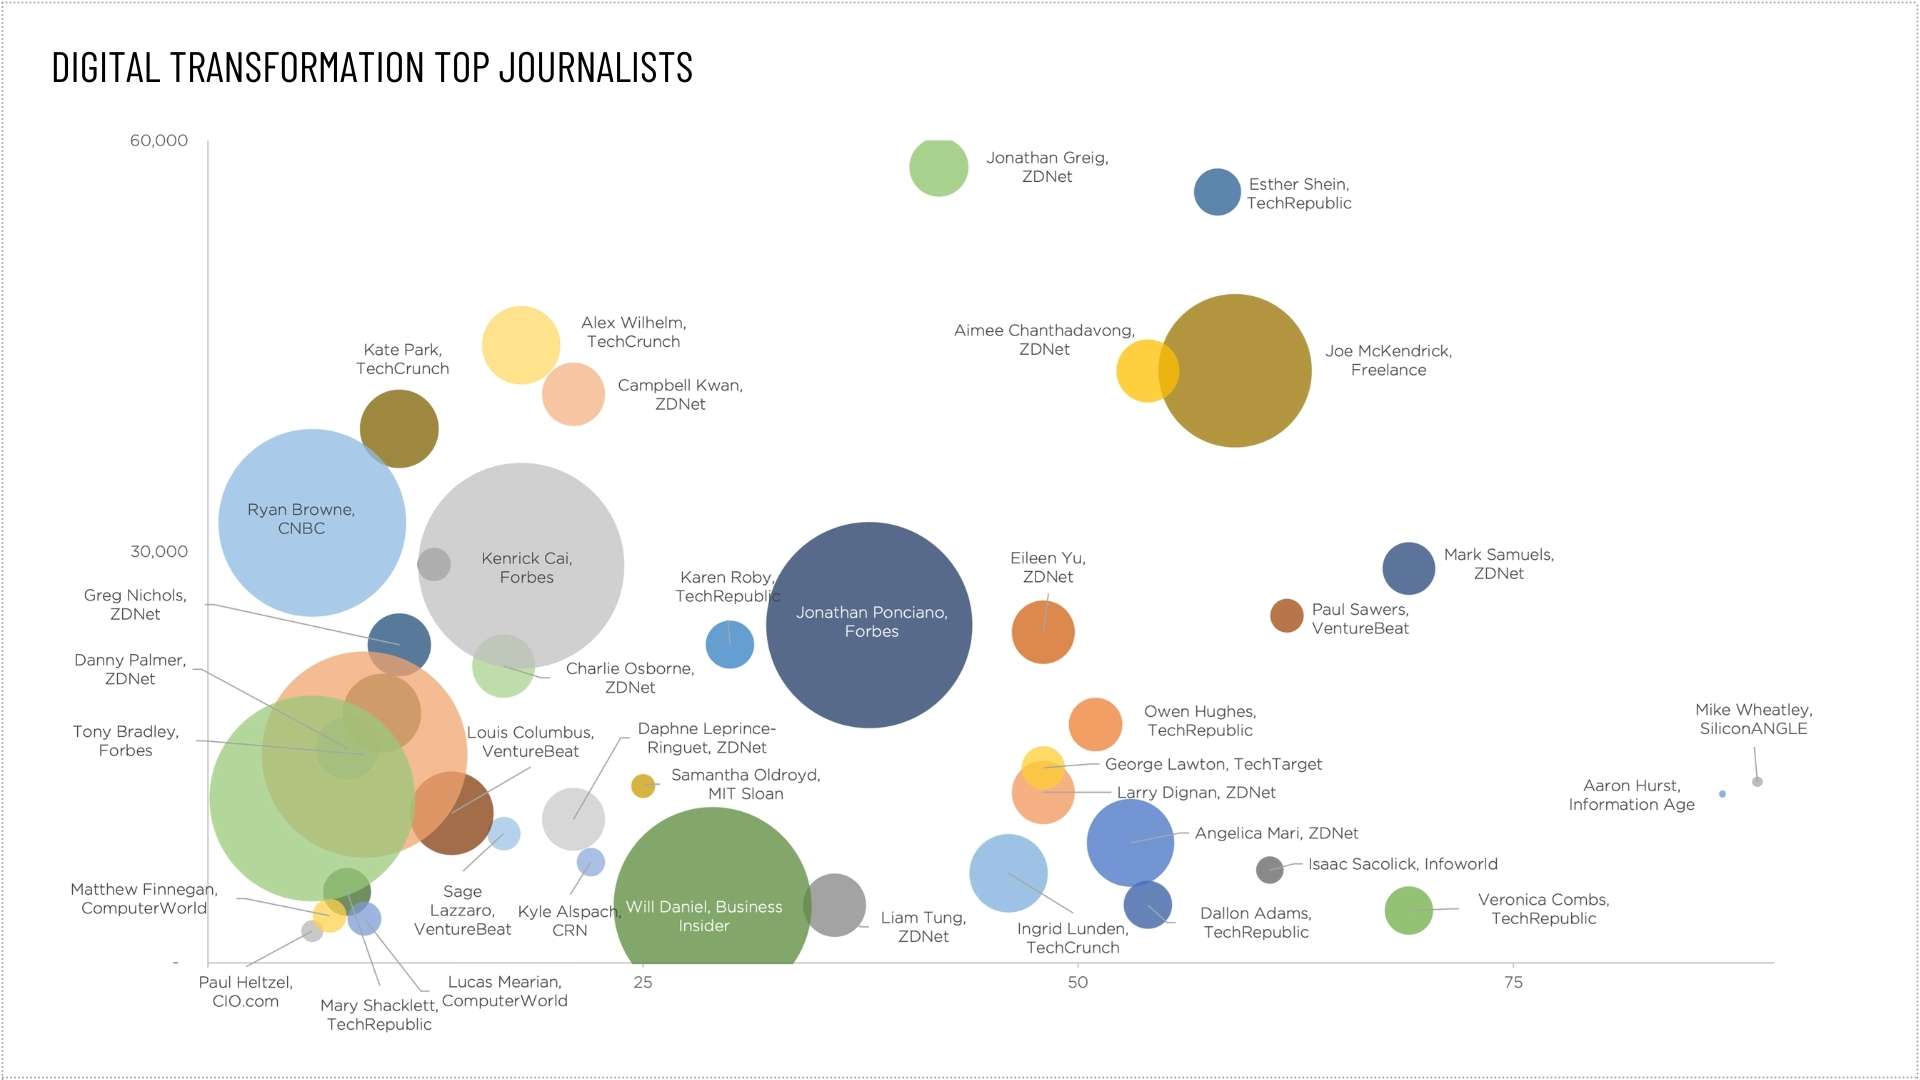 Identifying the Top Journalists Covering Digital Transformation